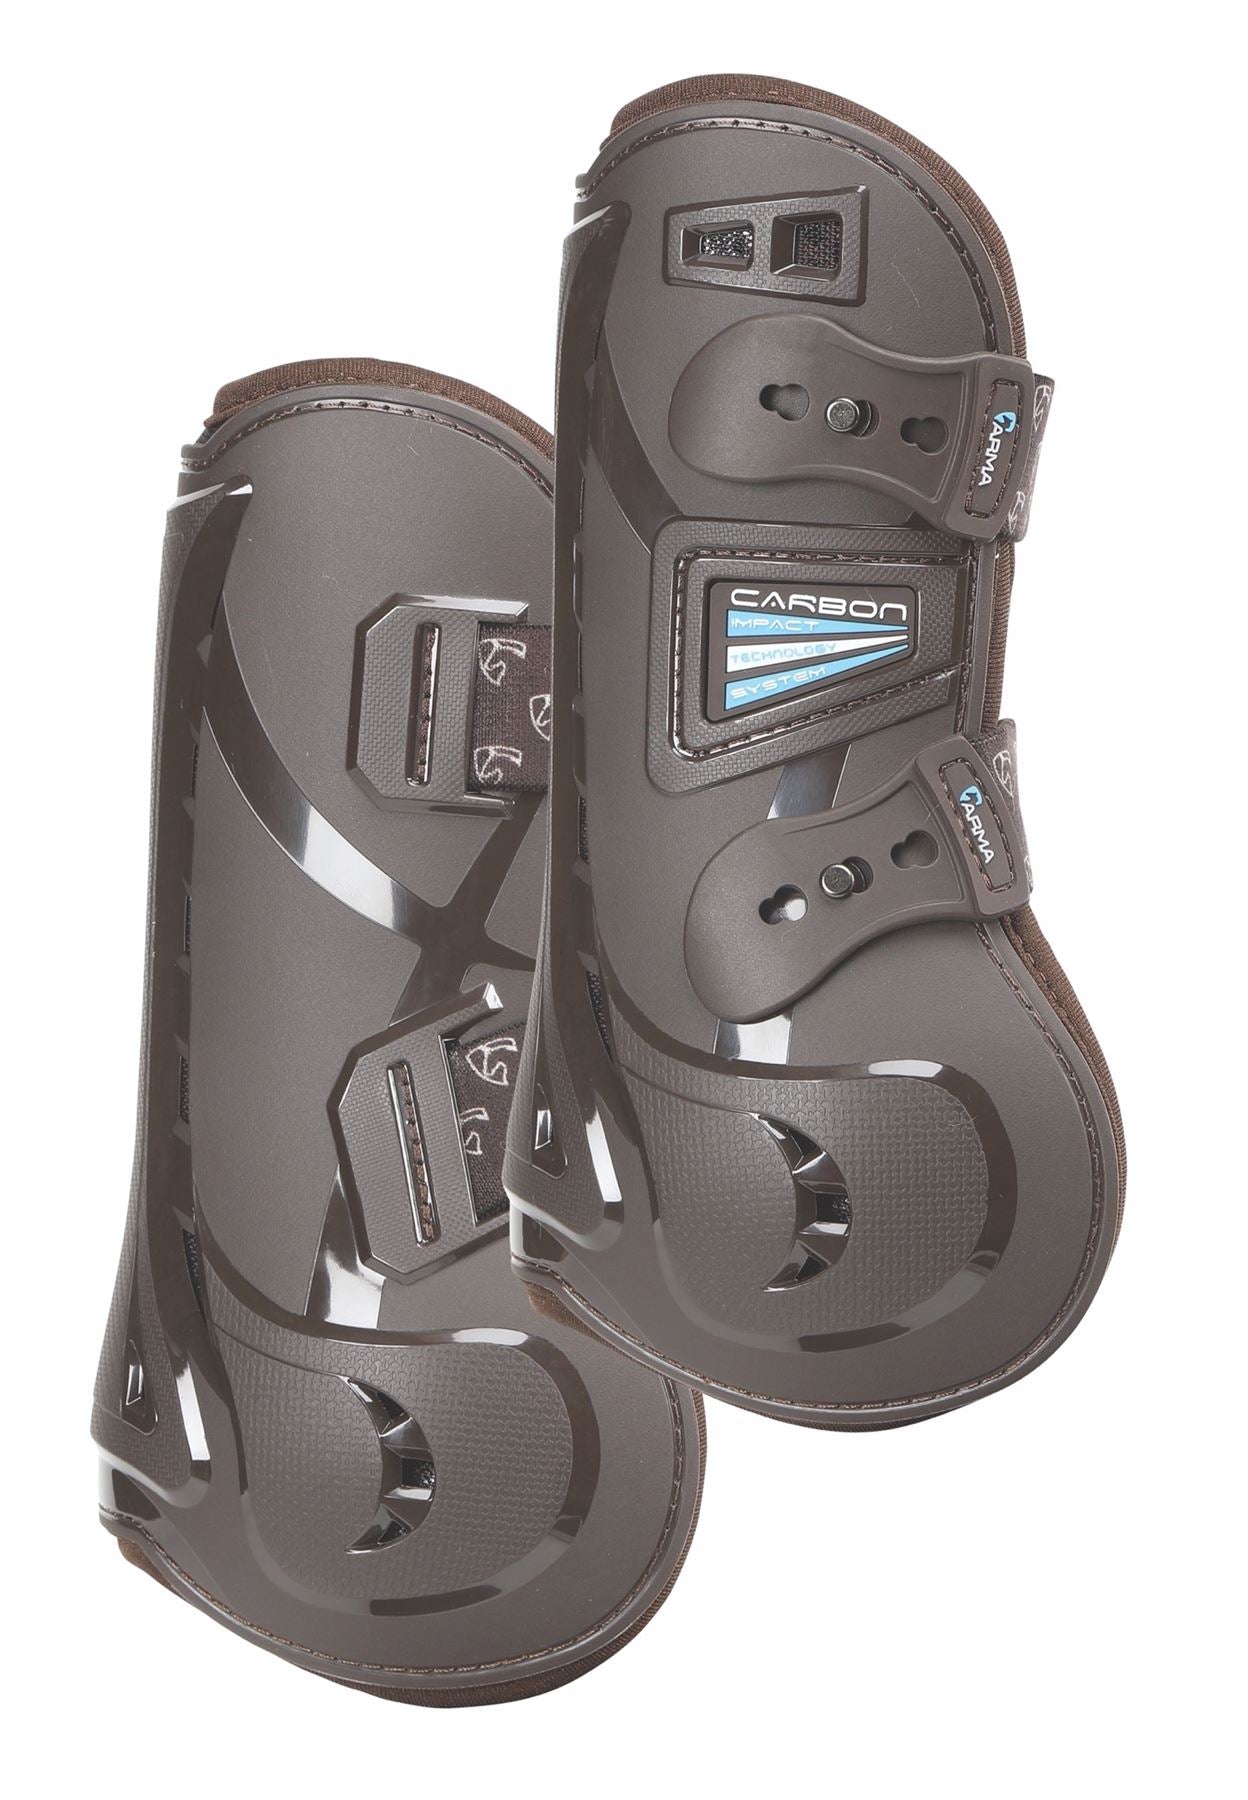 Shires Arma Carbon Tendon Boots - Just Horse Riders